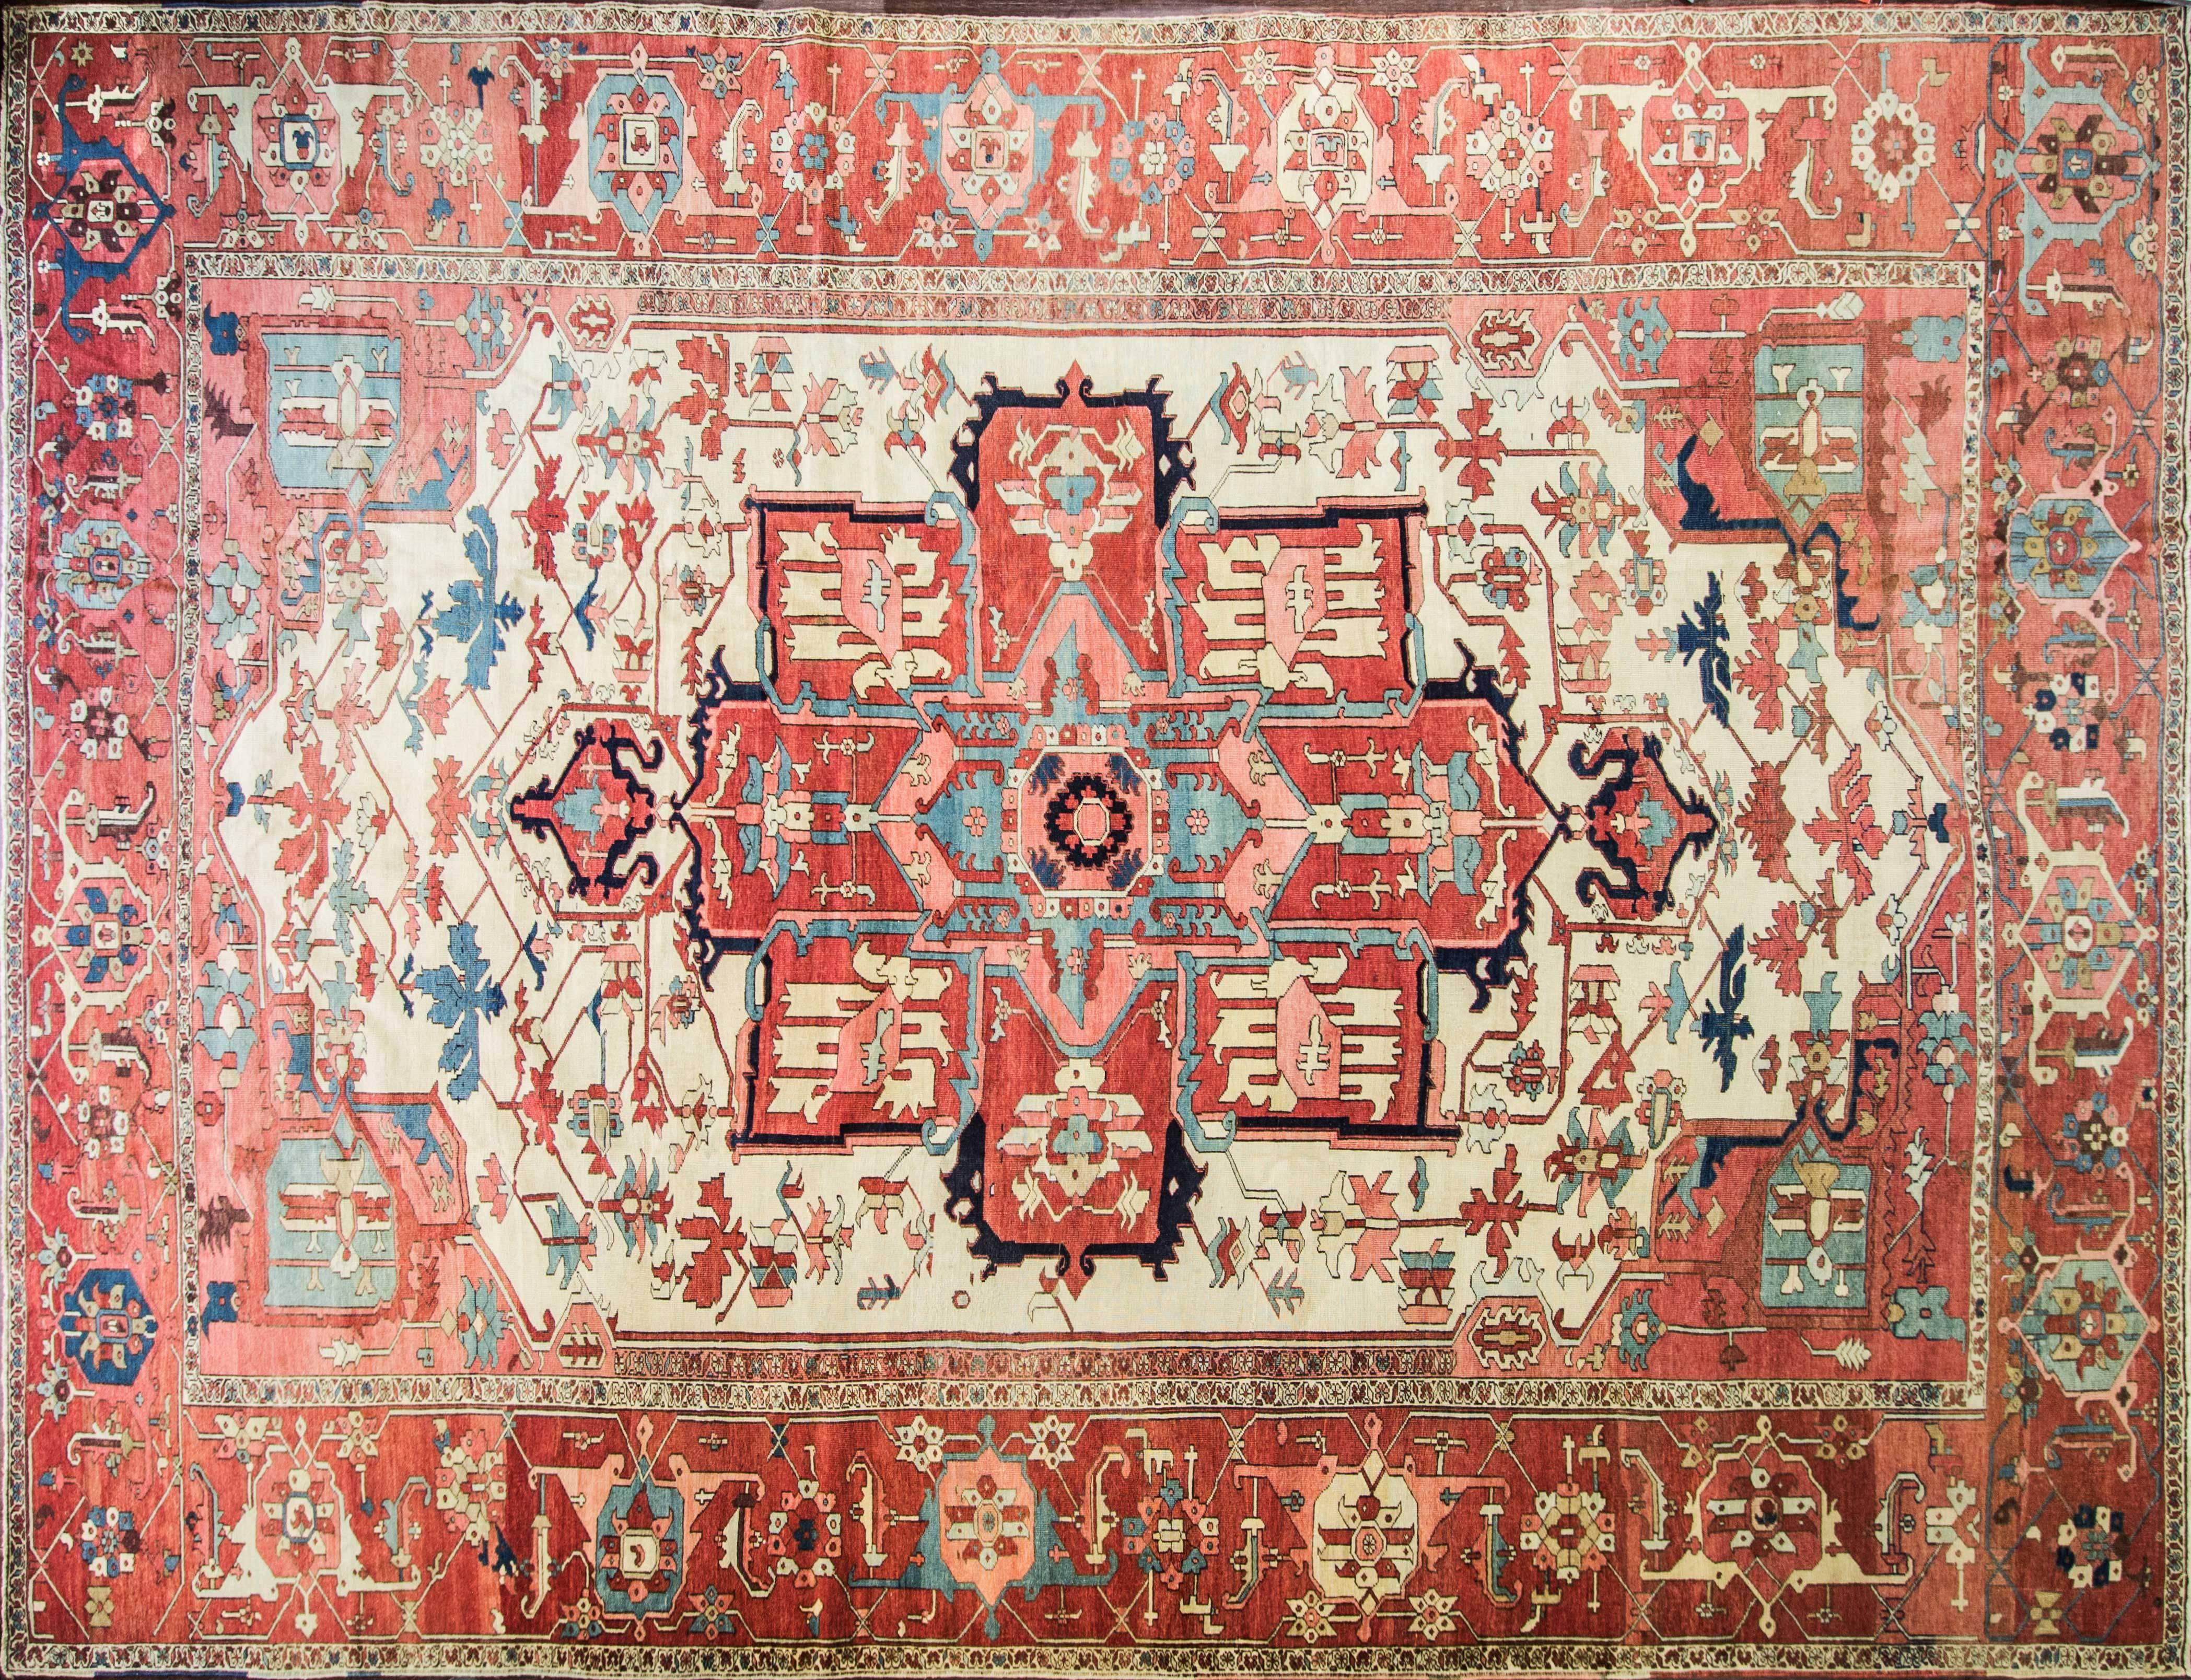 Large size antique Persian Serapi rug, Persia, circa late 19th century. This remarkable and artistic antique rug, showcases an ornate, multicolored central design. At the heart of the antique Persian Heriz Serapi rug, a many-petaled flower is